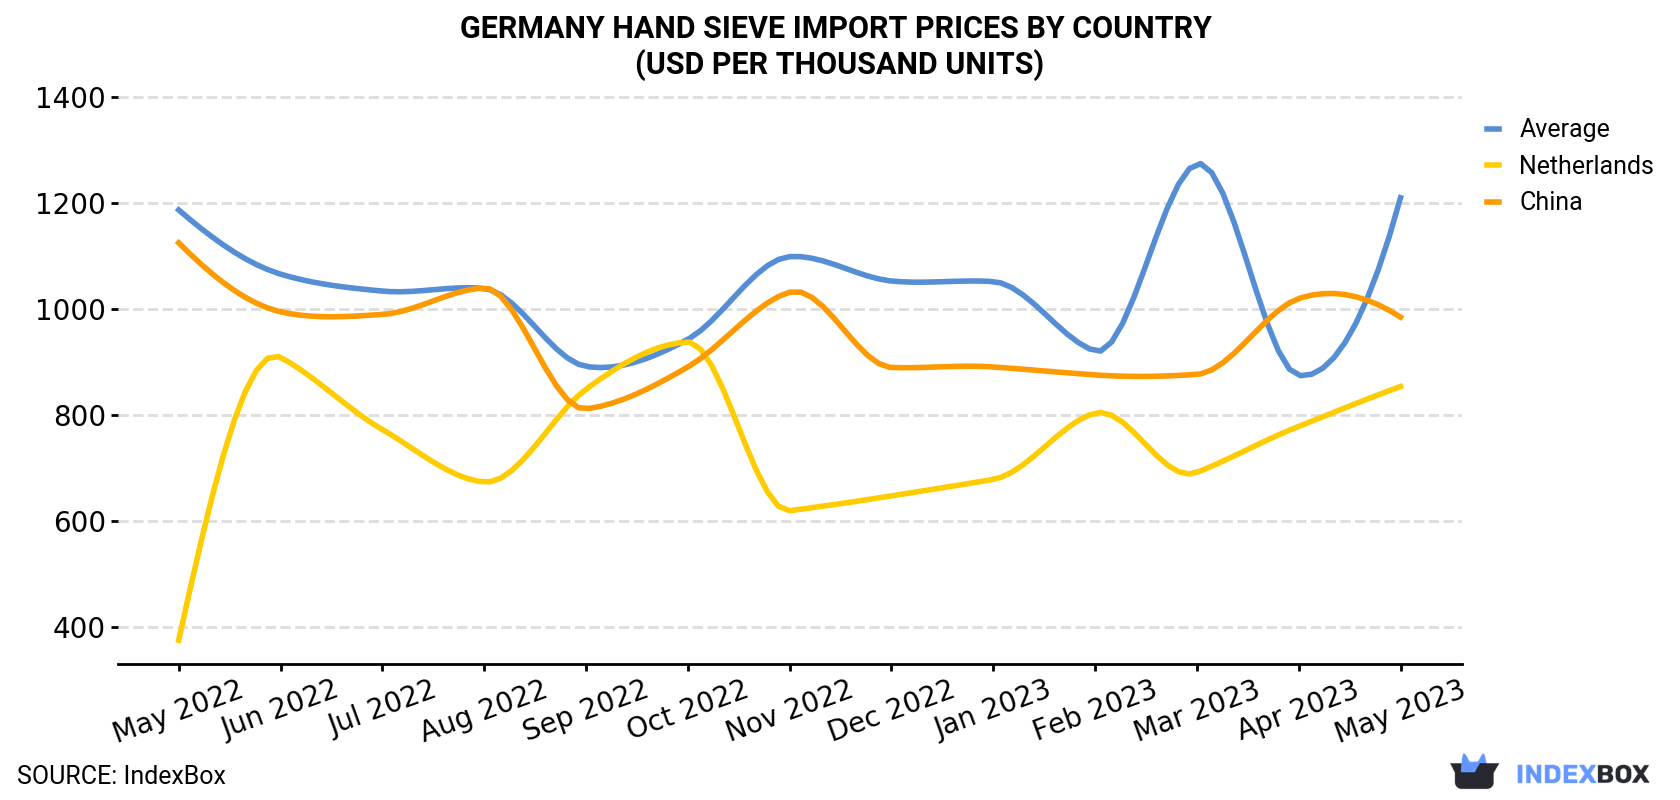 Germany Hand Sieve Import Prices By Country (USD Per Thousand Units)